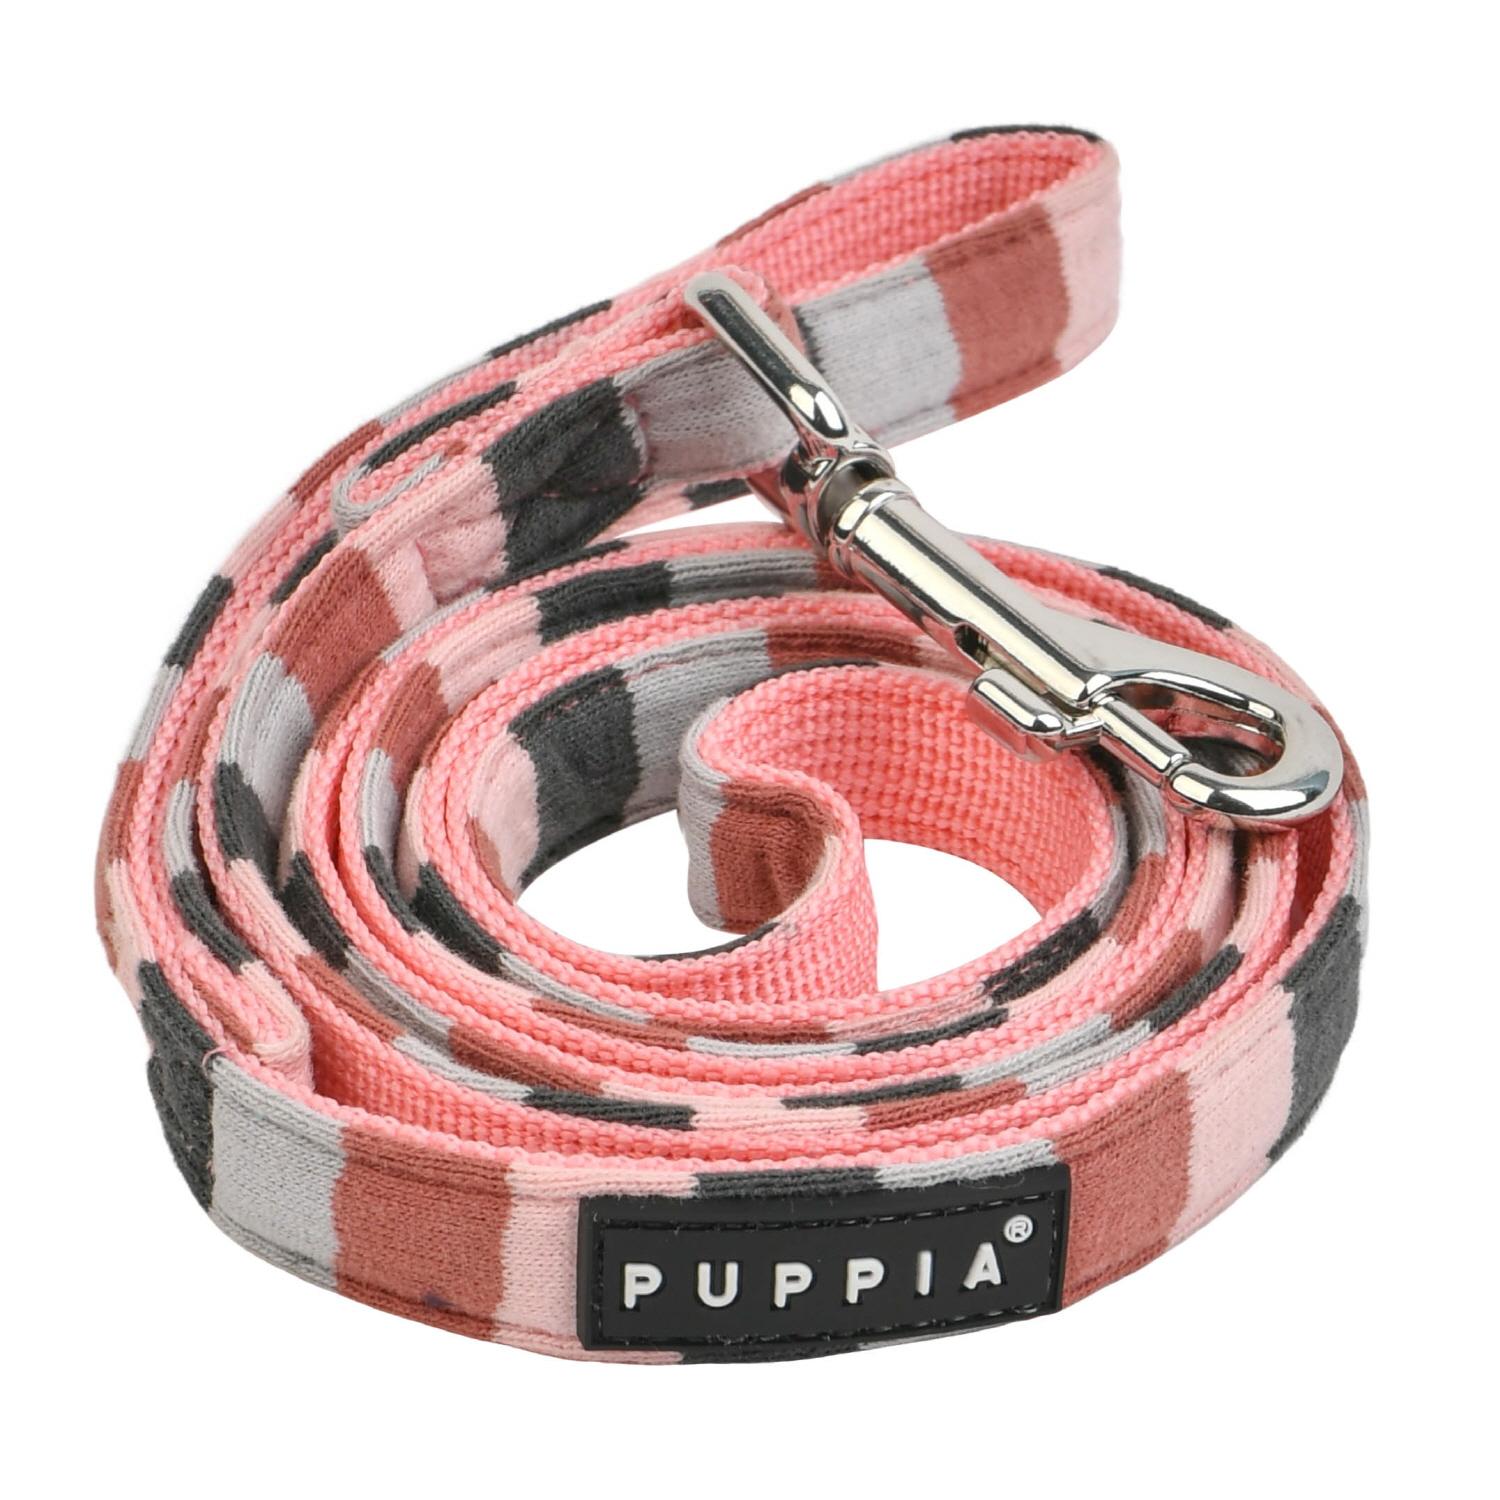 Bryson Dog Leash by Puppia - Indian Pink